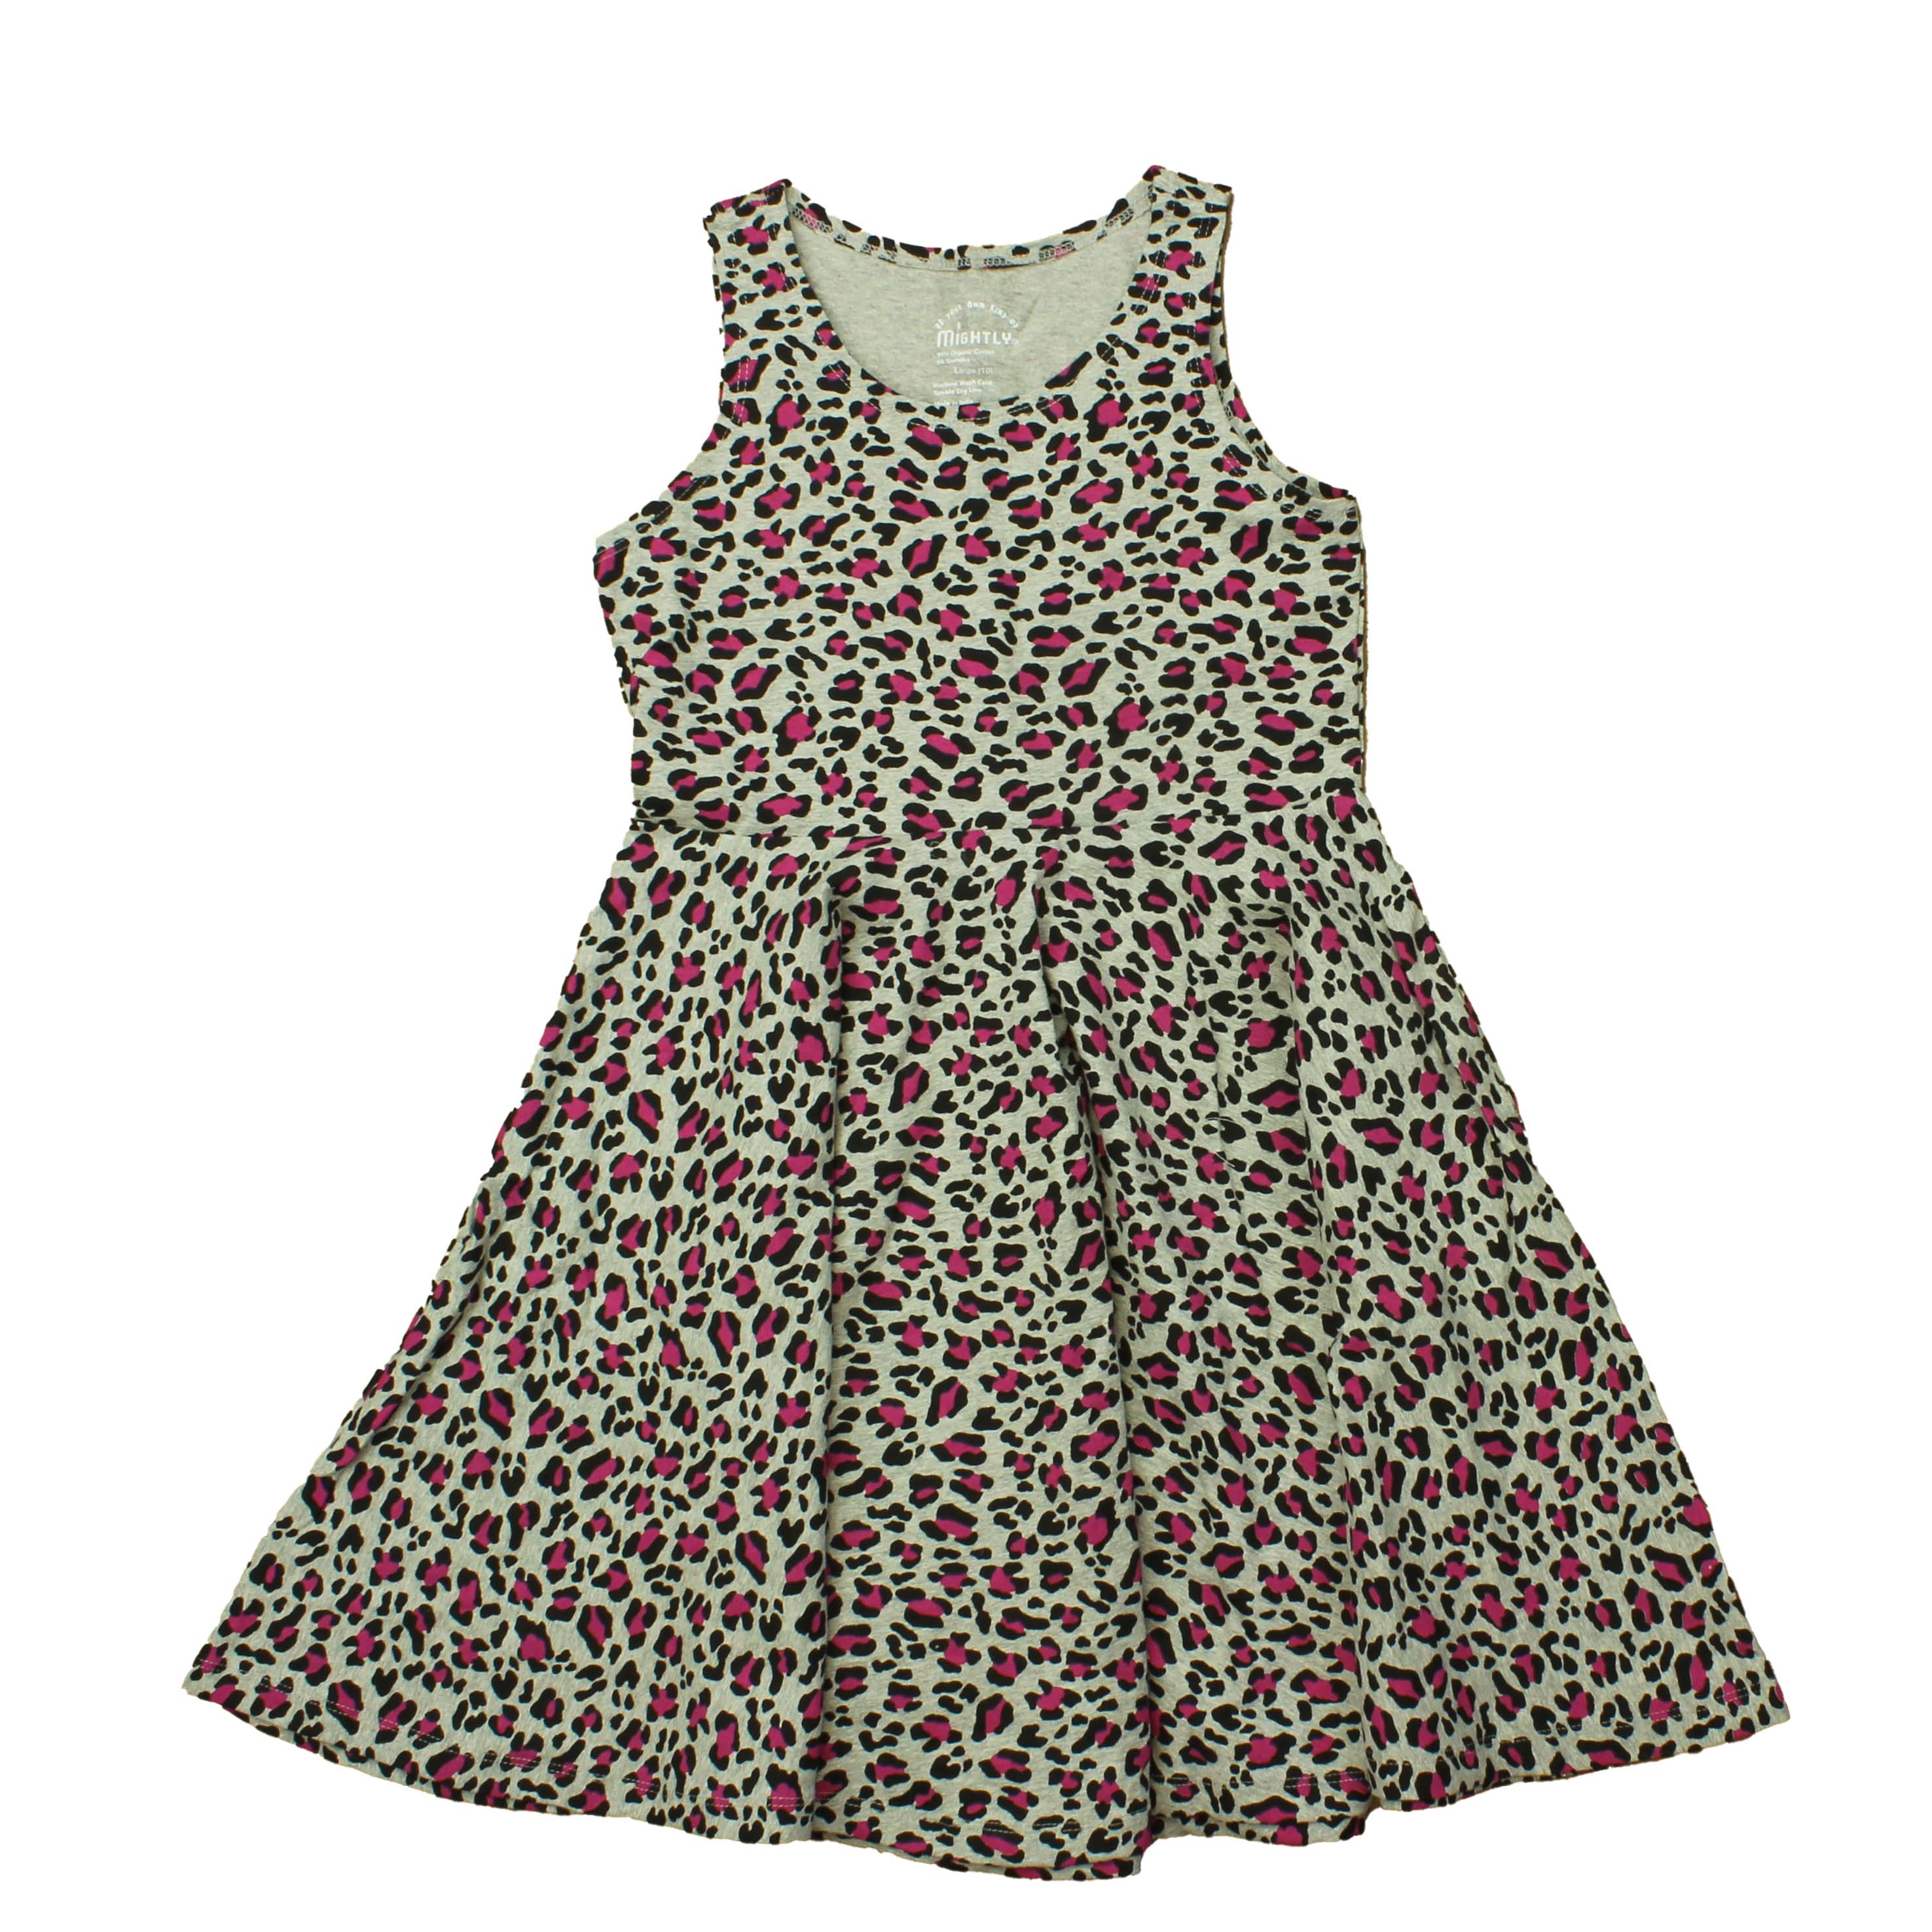 Pre-owned Grey | Raspberry Dress size: 4-5T